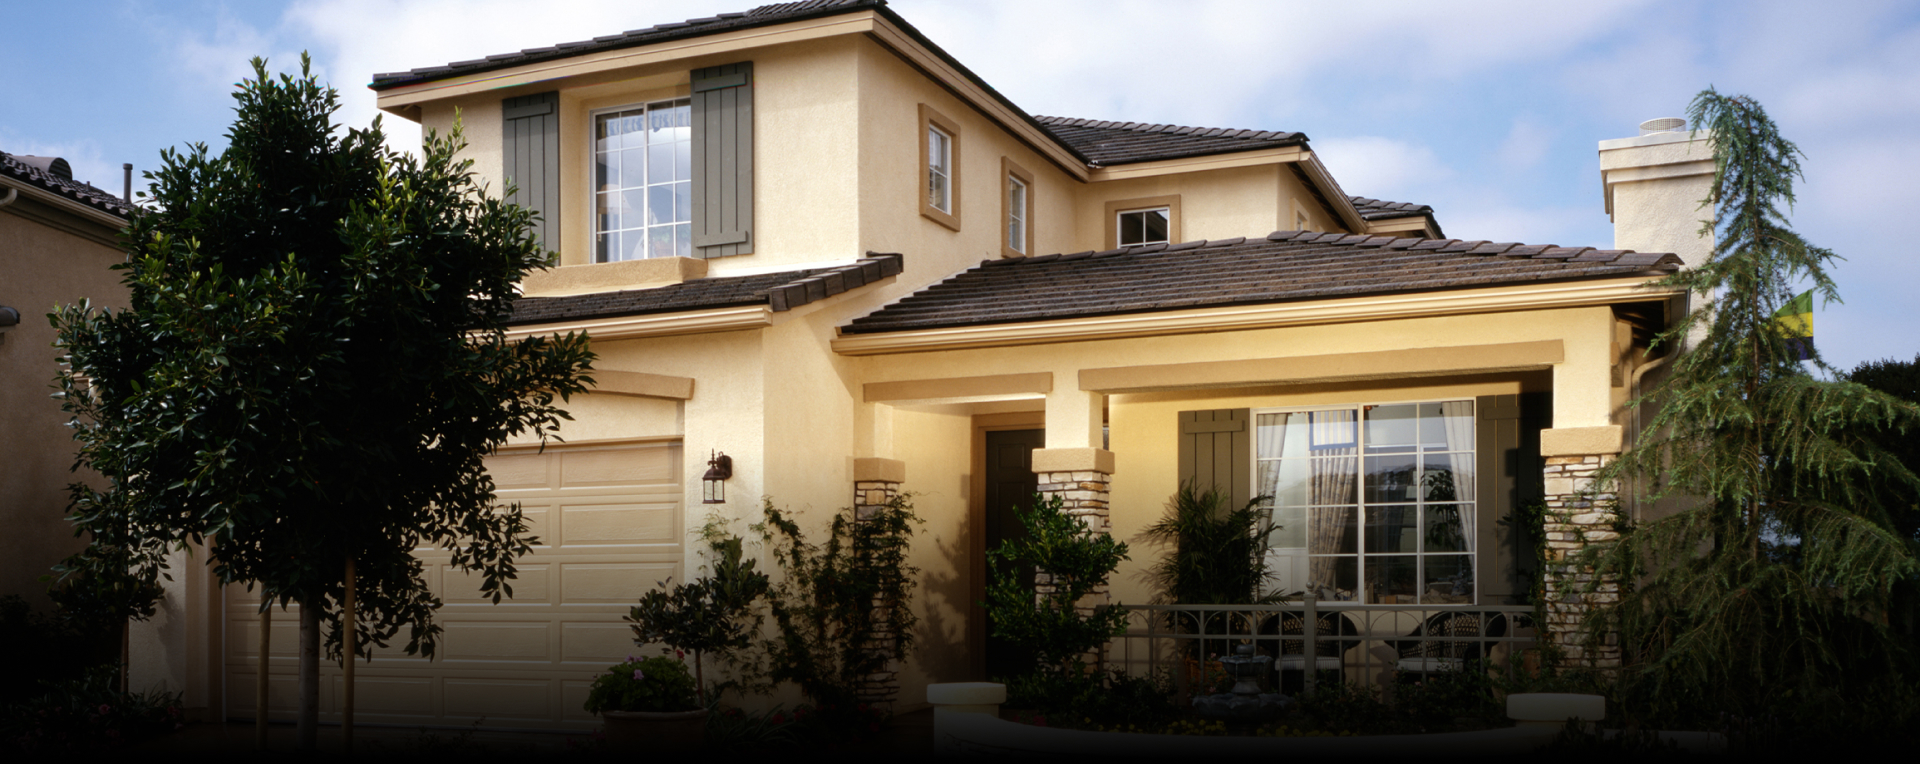 Contact Custom Stucco Solutions for trustworthy and dependable Stucco services 